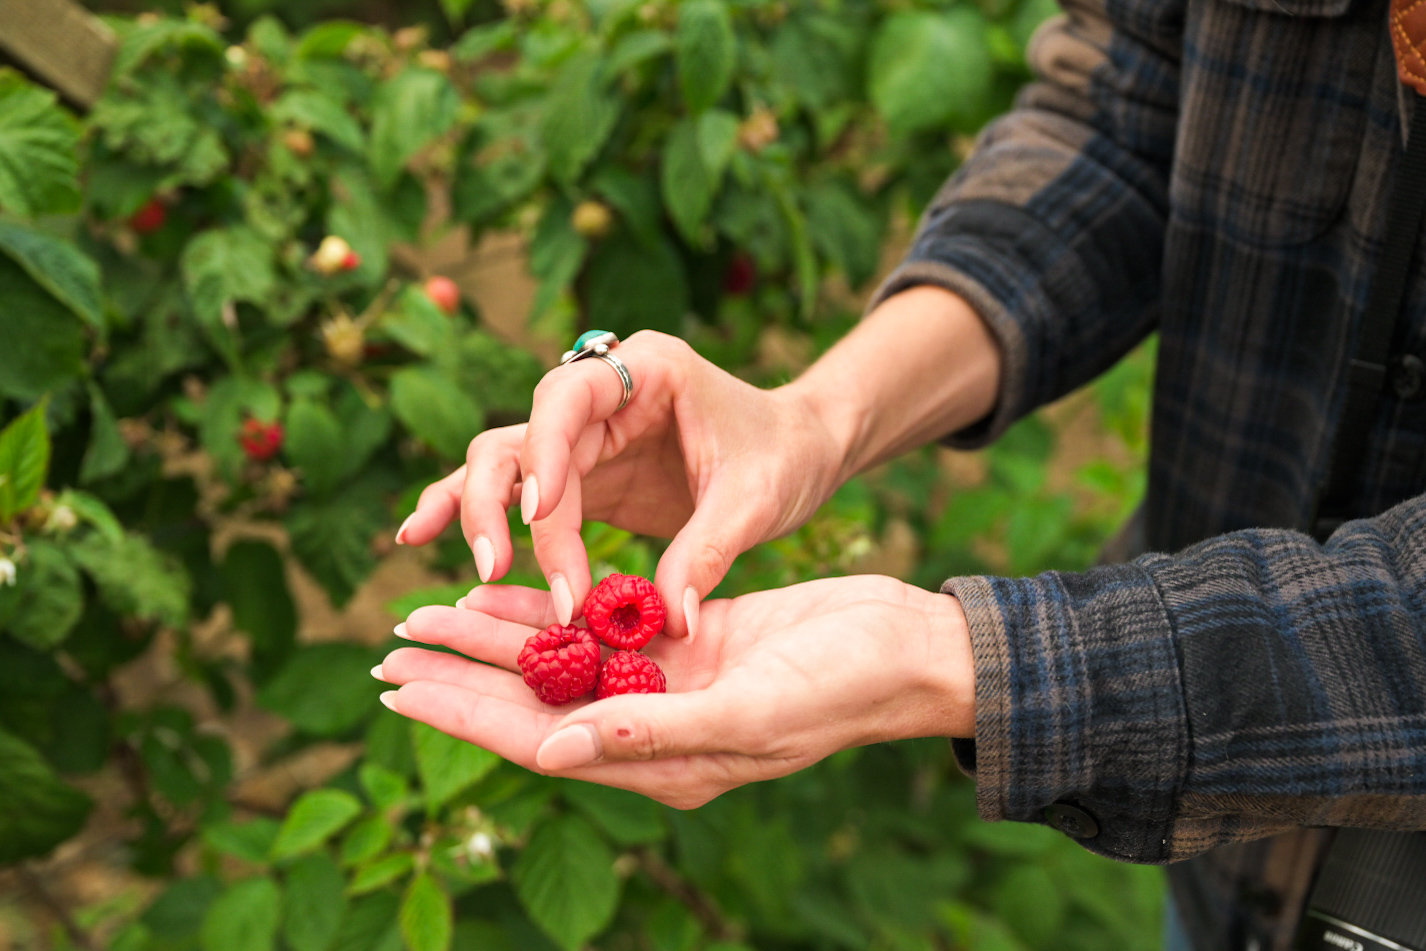 Red raspberries being picked by hand